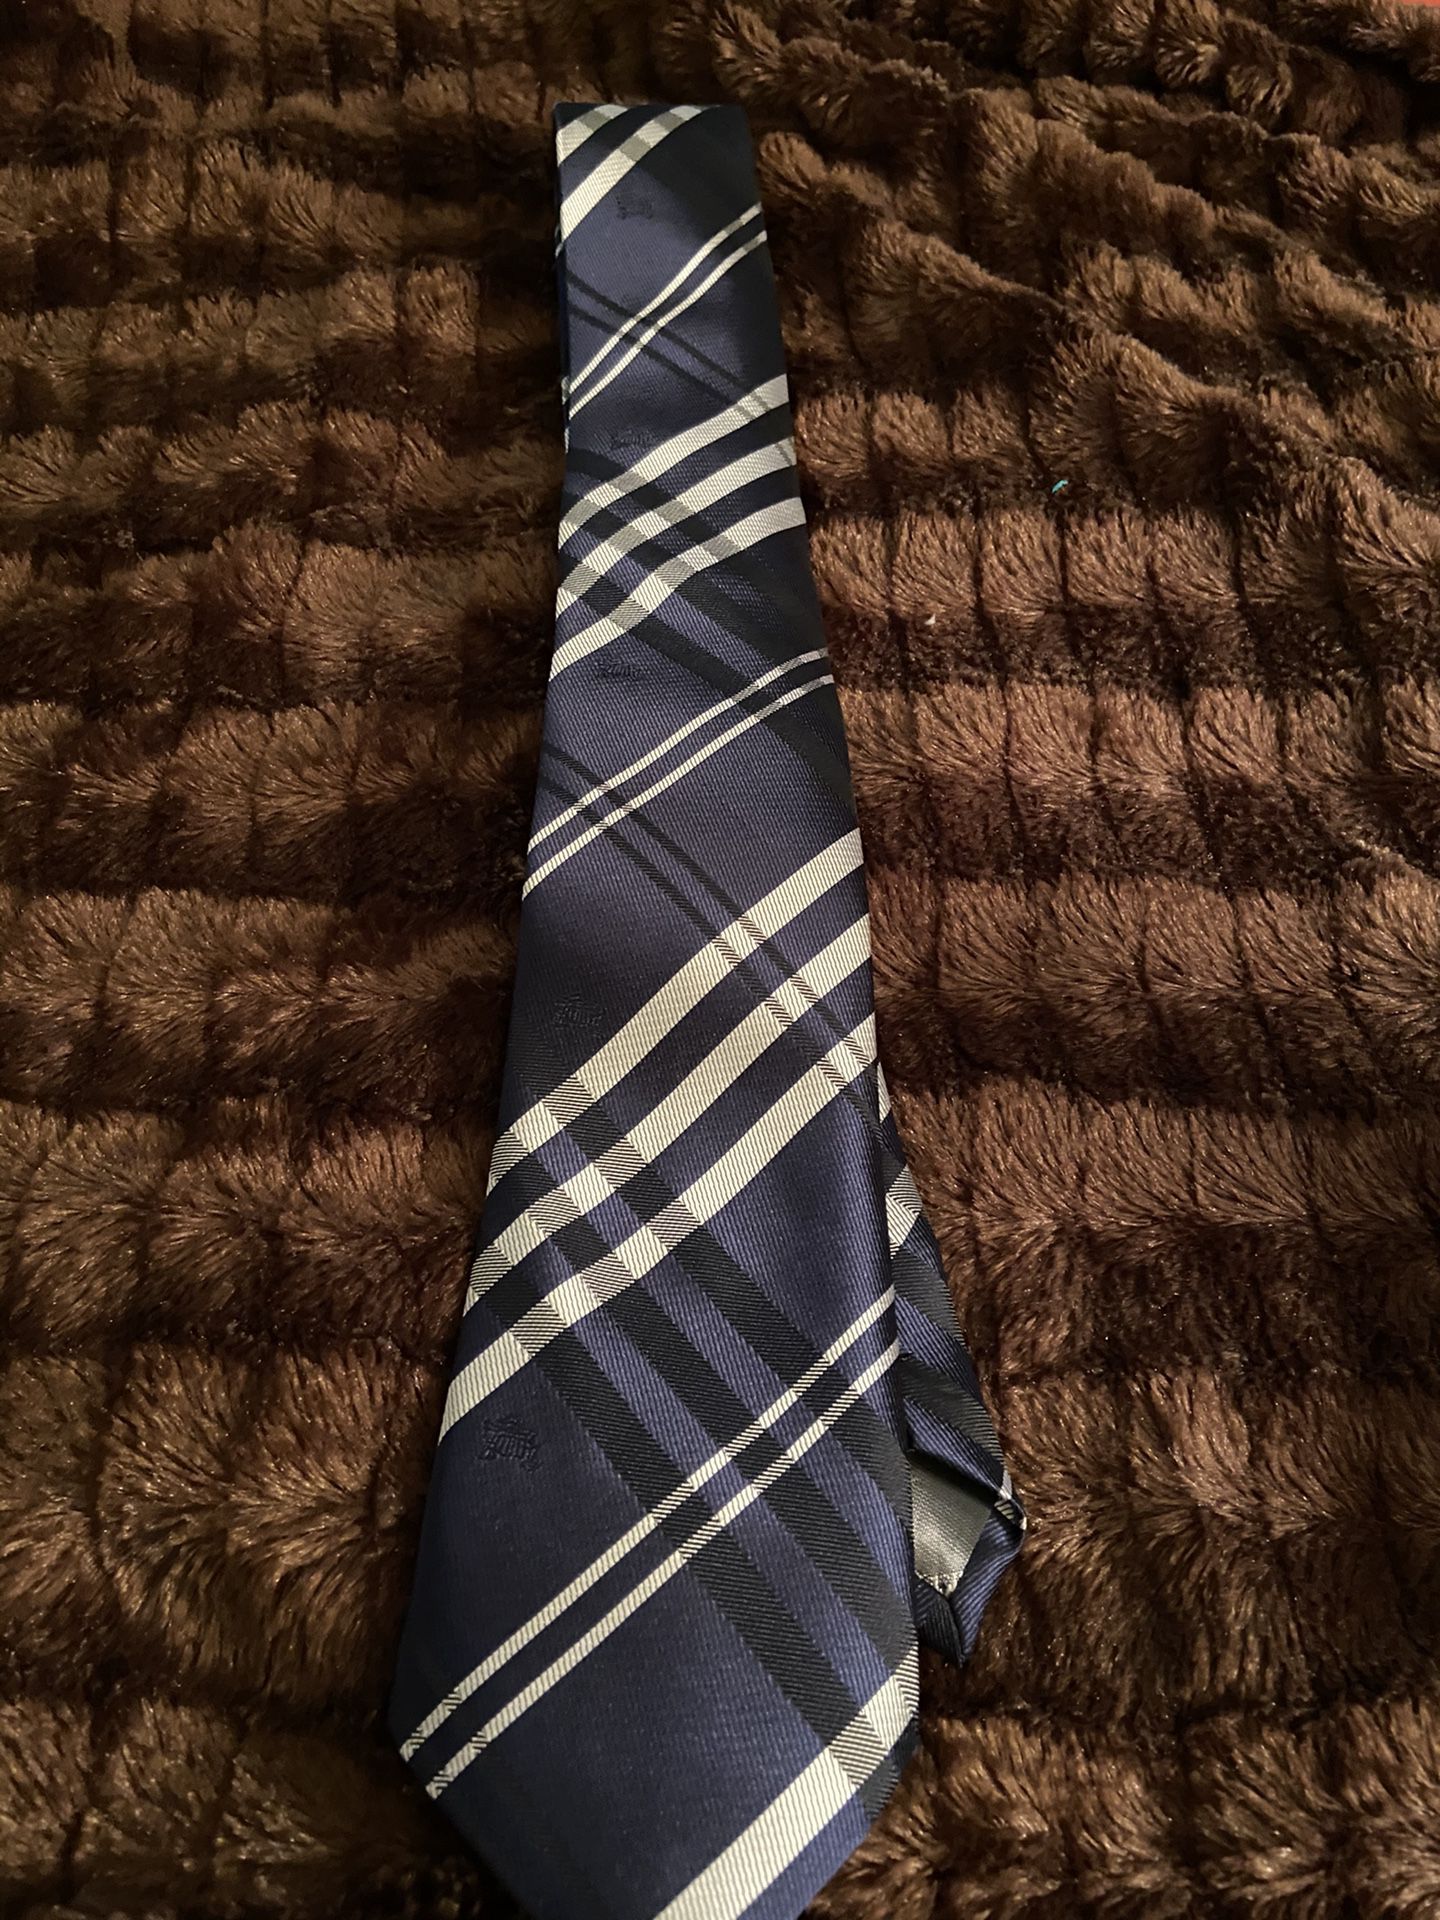 Burberry tie with gift box